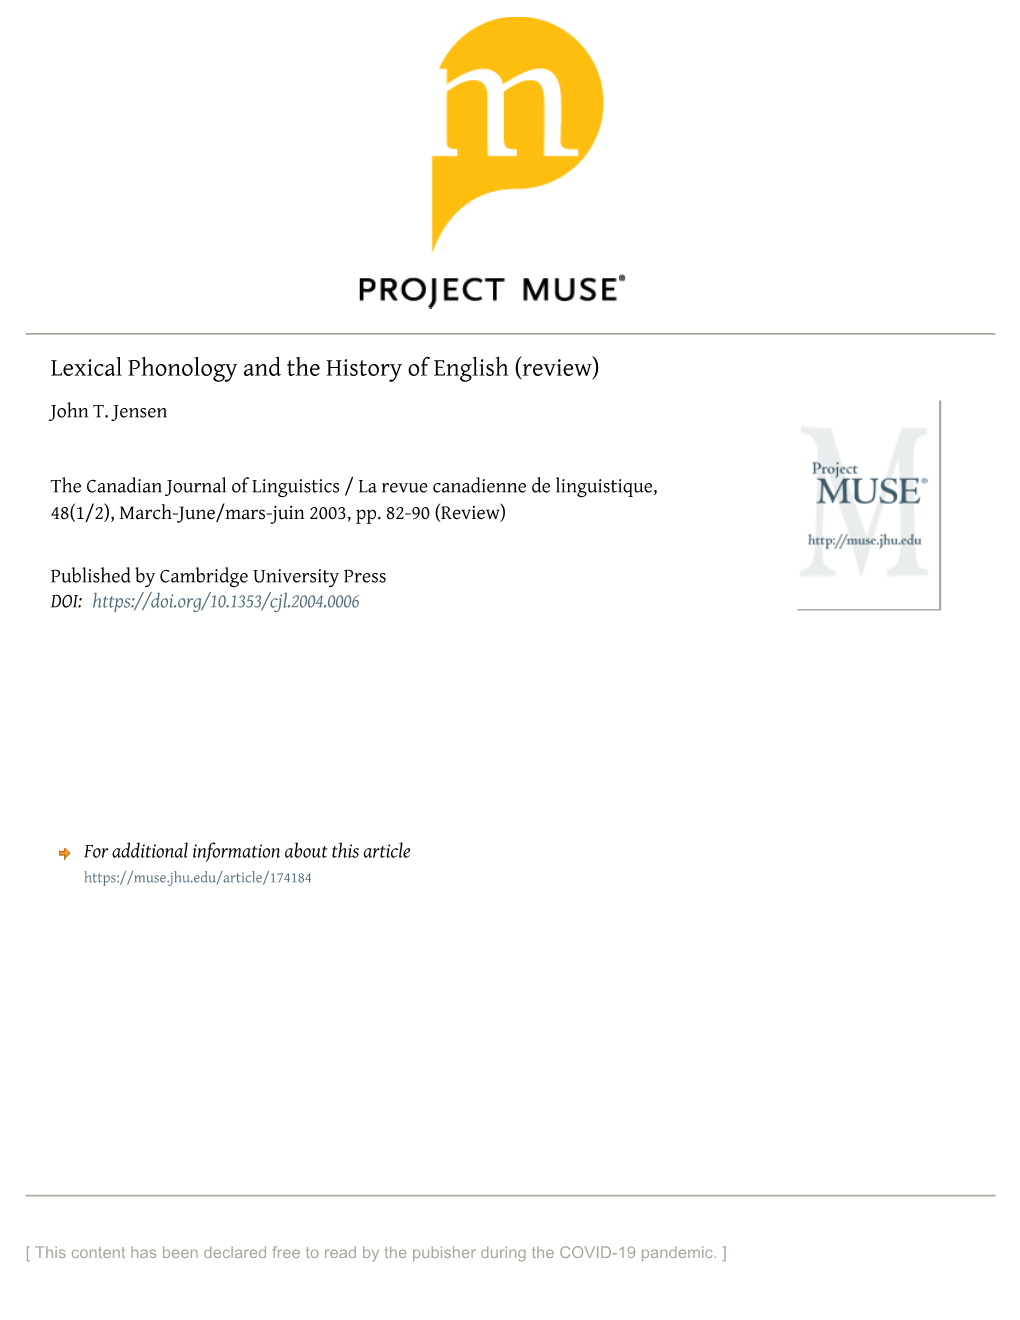 Lexical Phonology and the History of English (Review) John T